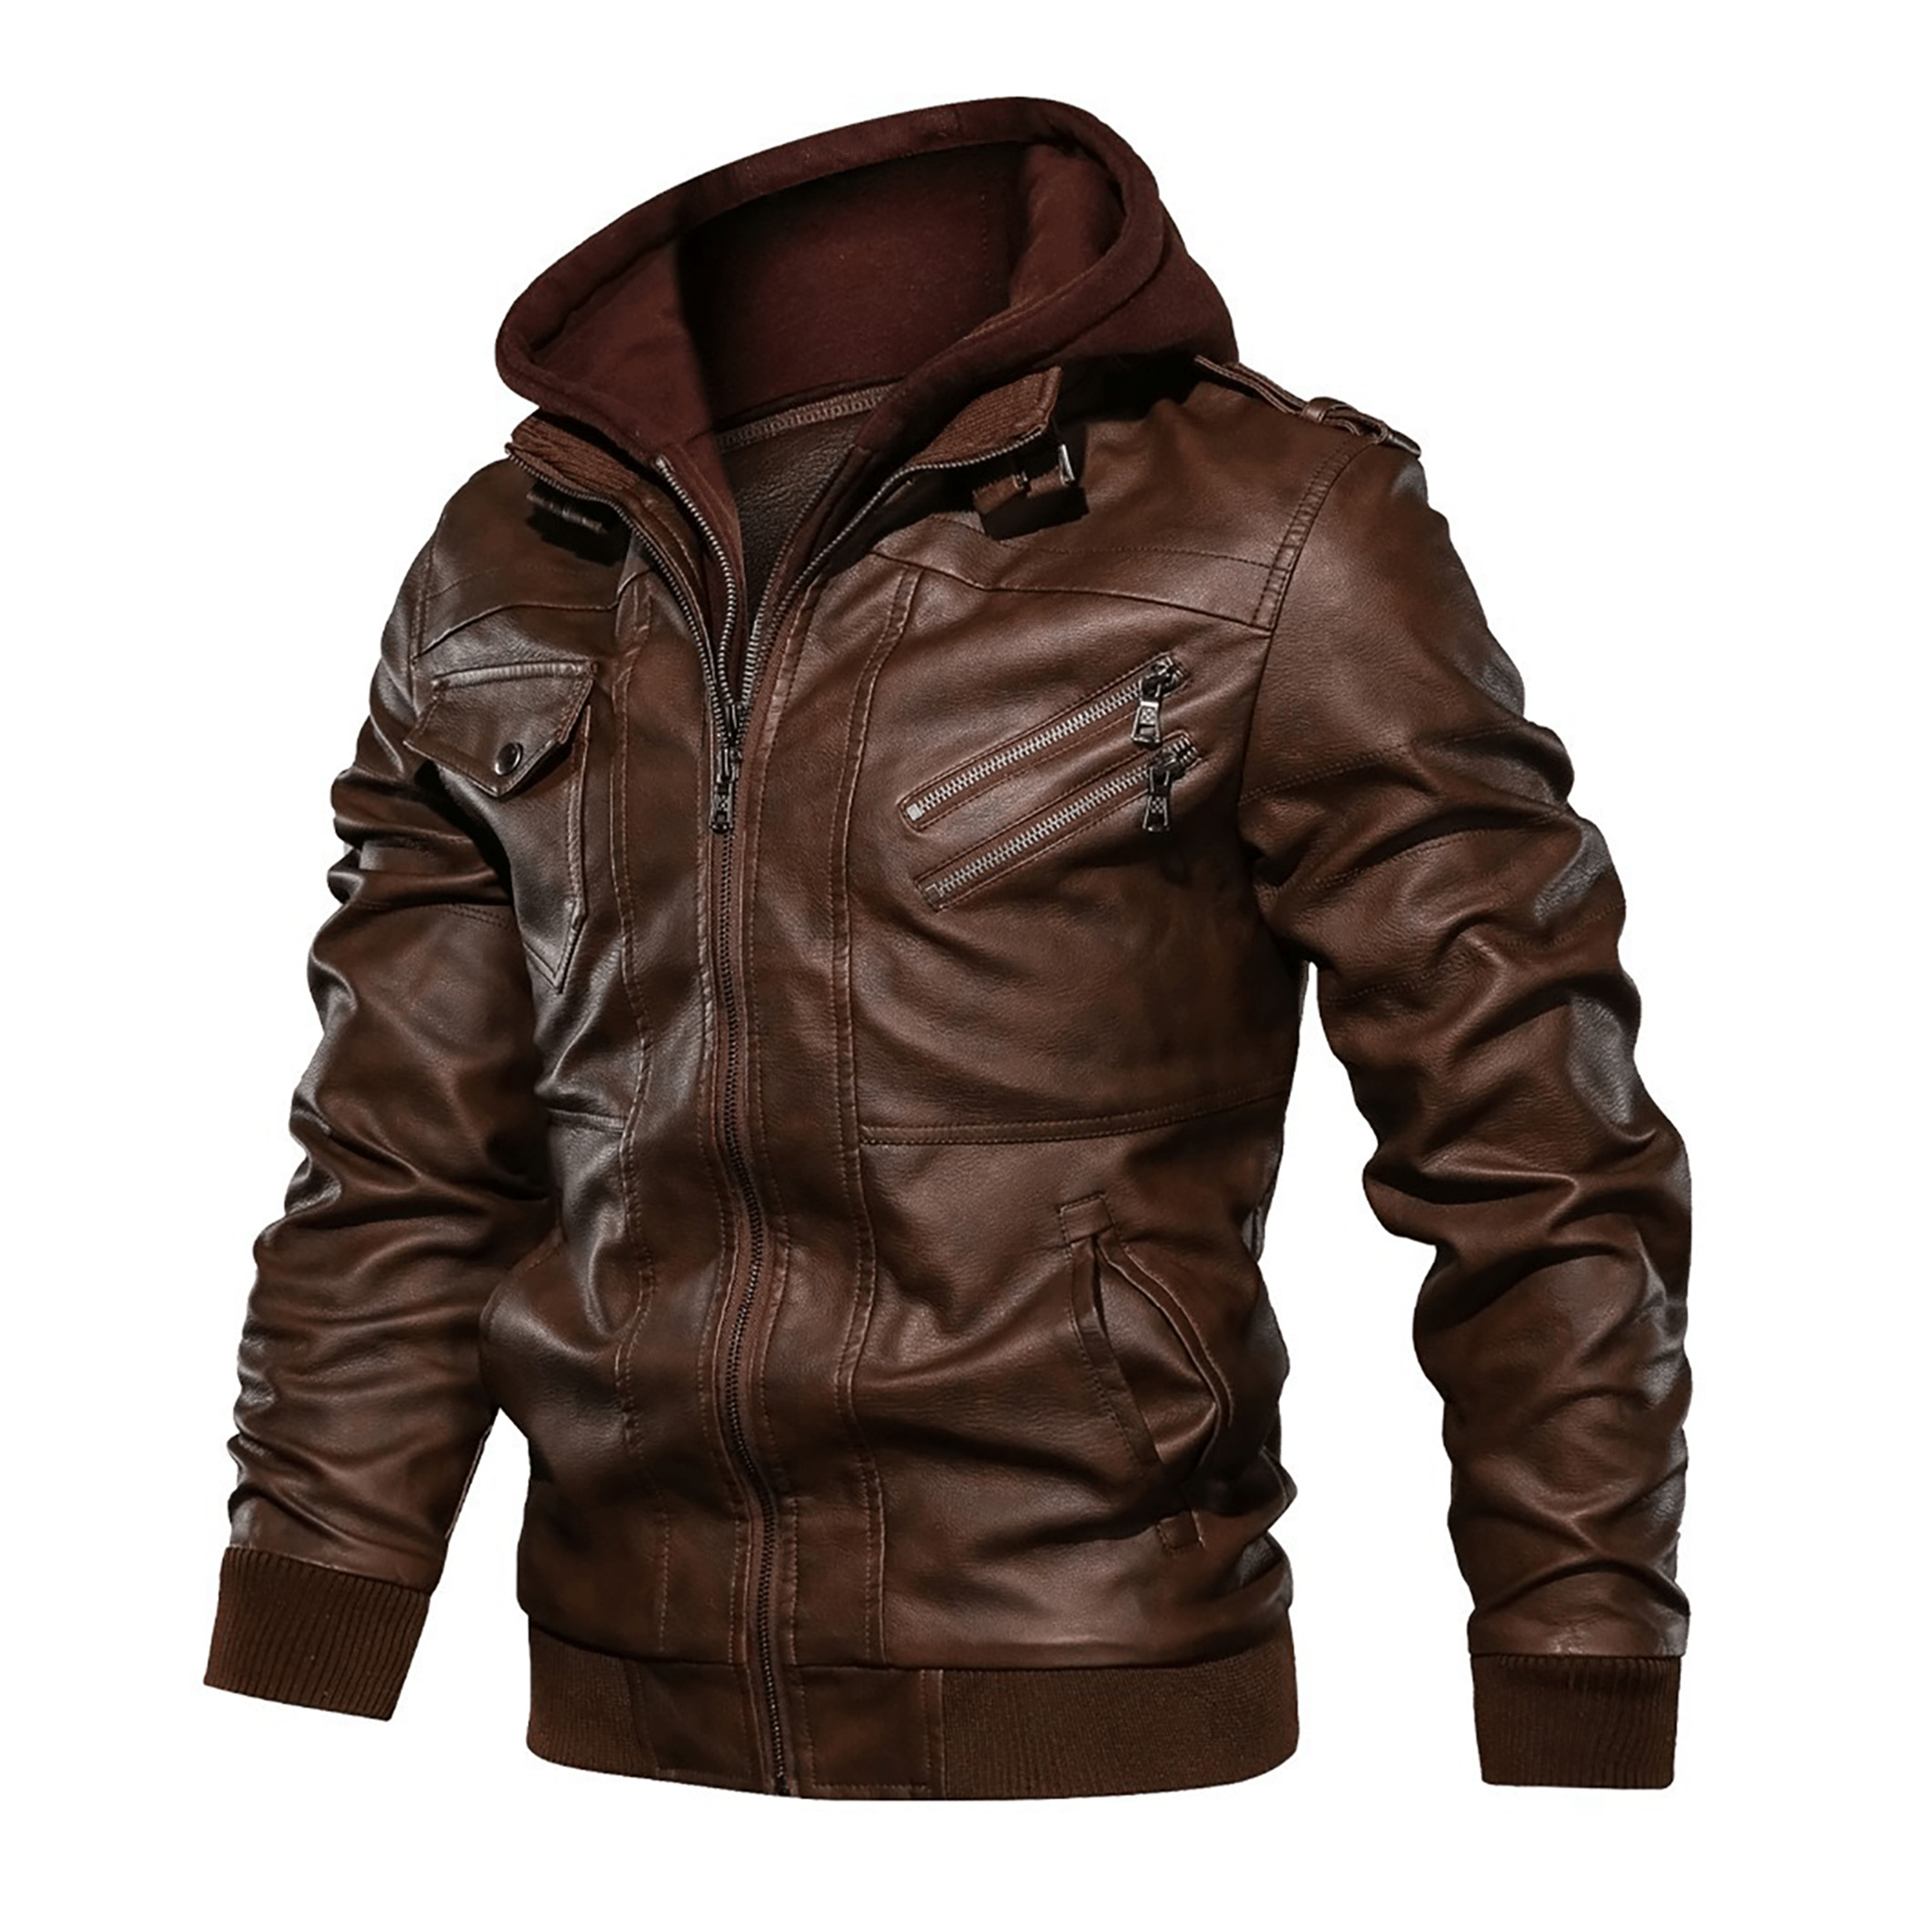 Top leather jackets and latest products 257